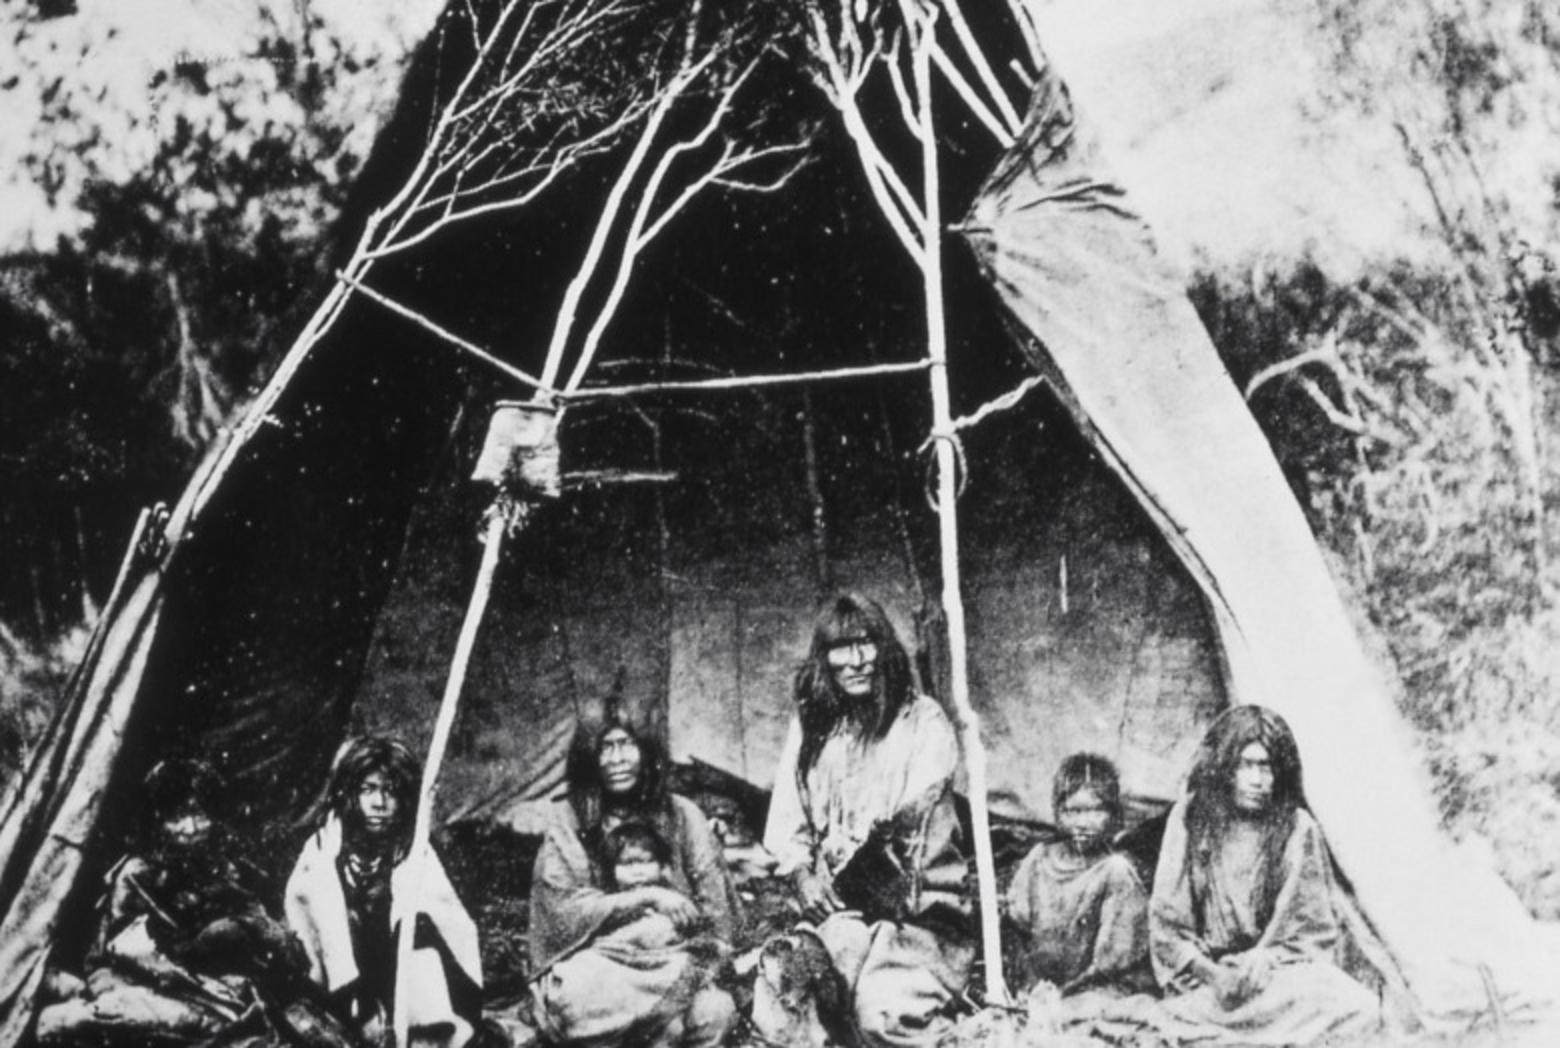 There are few, if any, photographs of the Eastern Shoshone inhabitants of Yellowstone known as the Sheepeaters (Tukudeka) that were there before it became a national park. Archeological evidence and oral stories speak to a long-lasting connection with lands that exist inside current park boundaries. This photo of a Tukudeka family was taken by William Henry Jackson in Idaho.